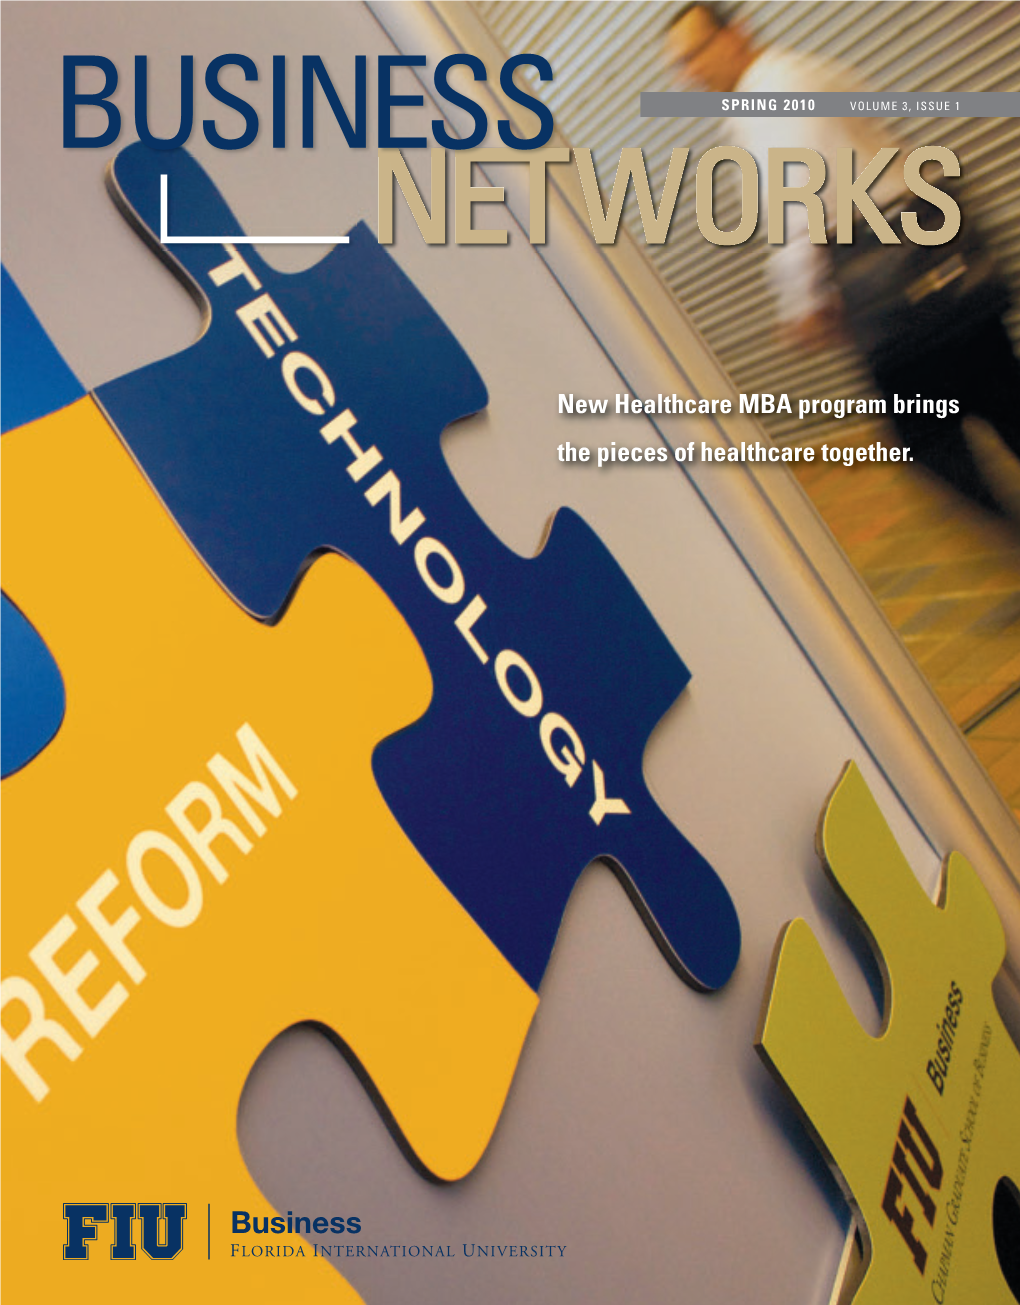 Spring 2010 Volume 3, Issue 1 Networks